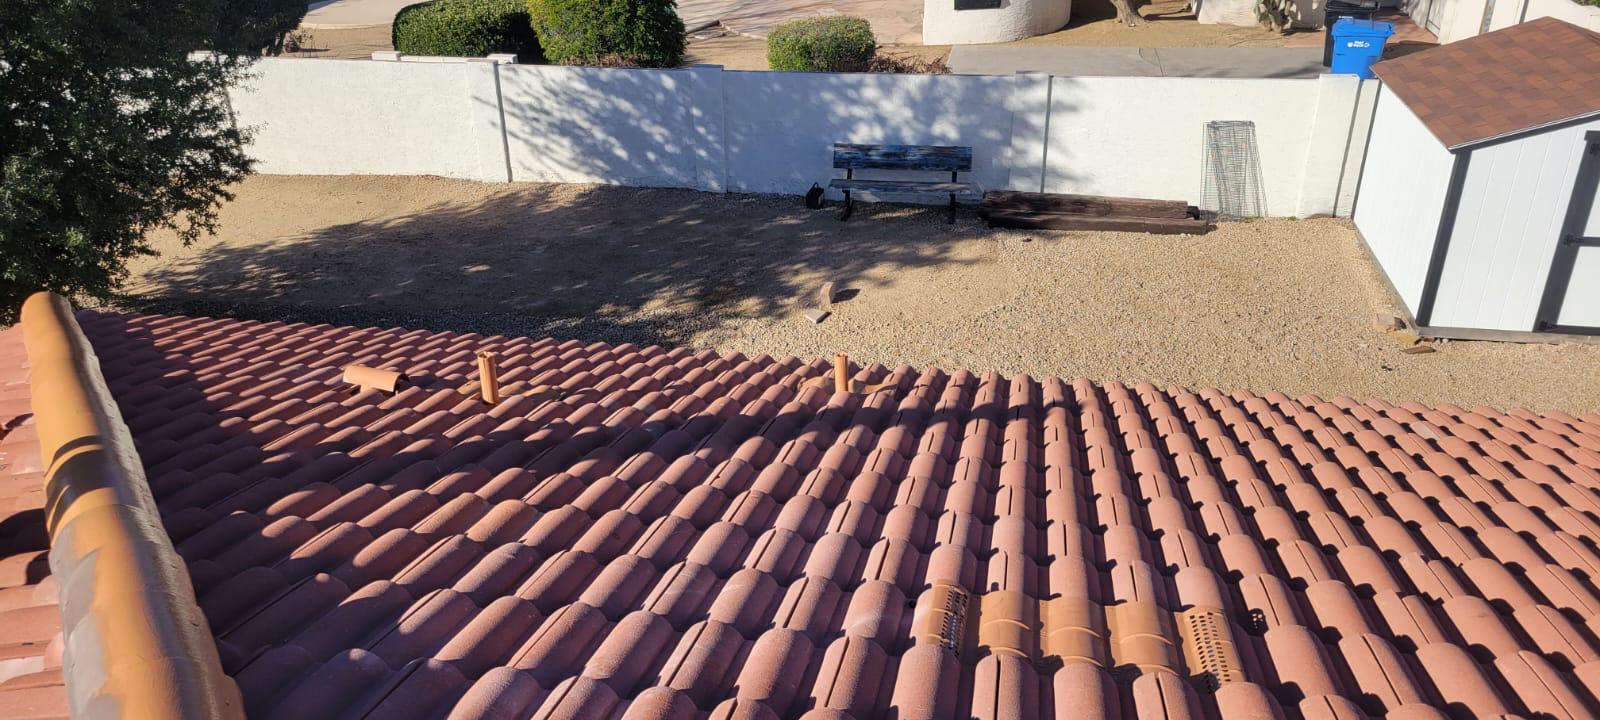 Lateral view of a Desert Ridge home during the tile repair process.